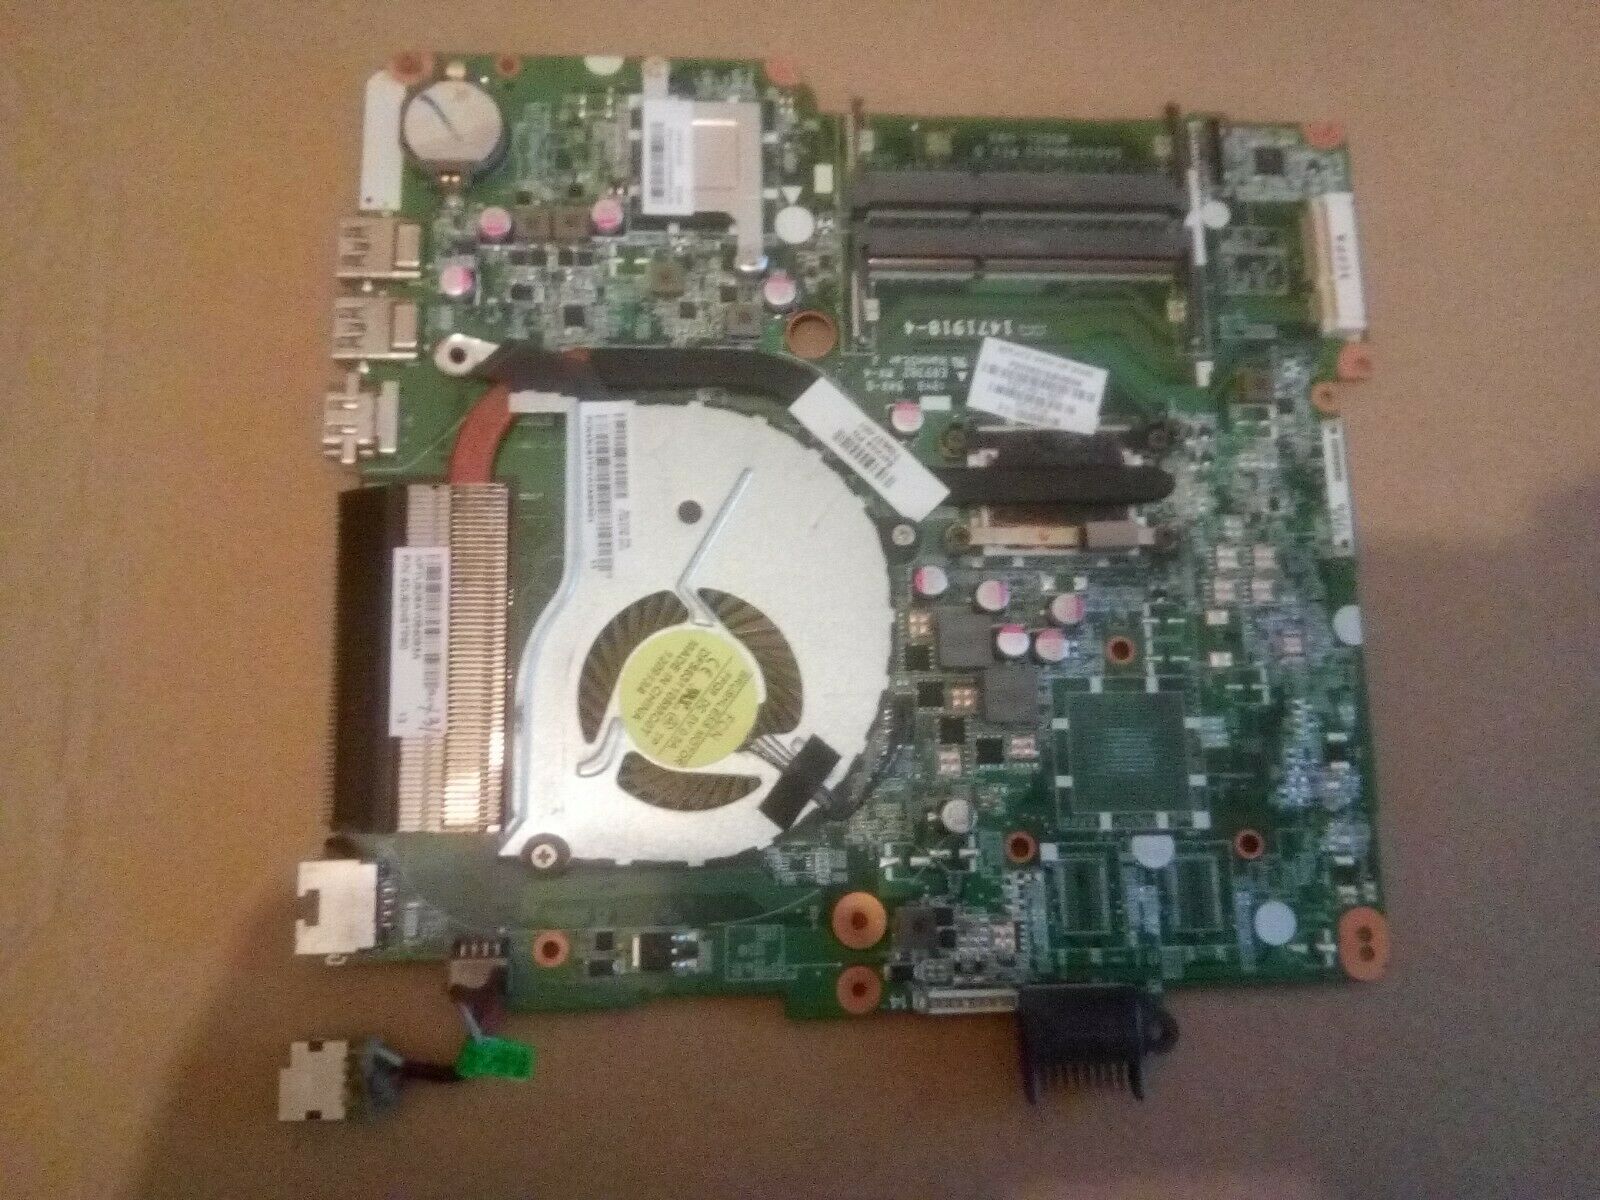 HP PAVILION 15-N SERIES LAPTOP MOTHERBOARD AMD A8 CPU P/N 737140-501 - Ref: E44 Genuine used part. Used but